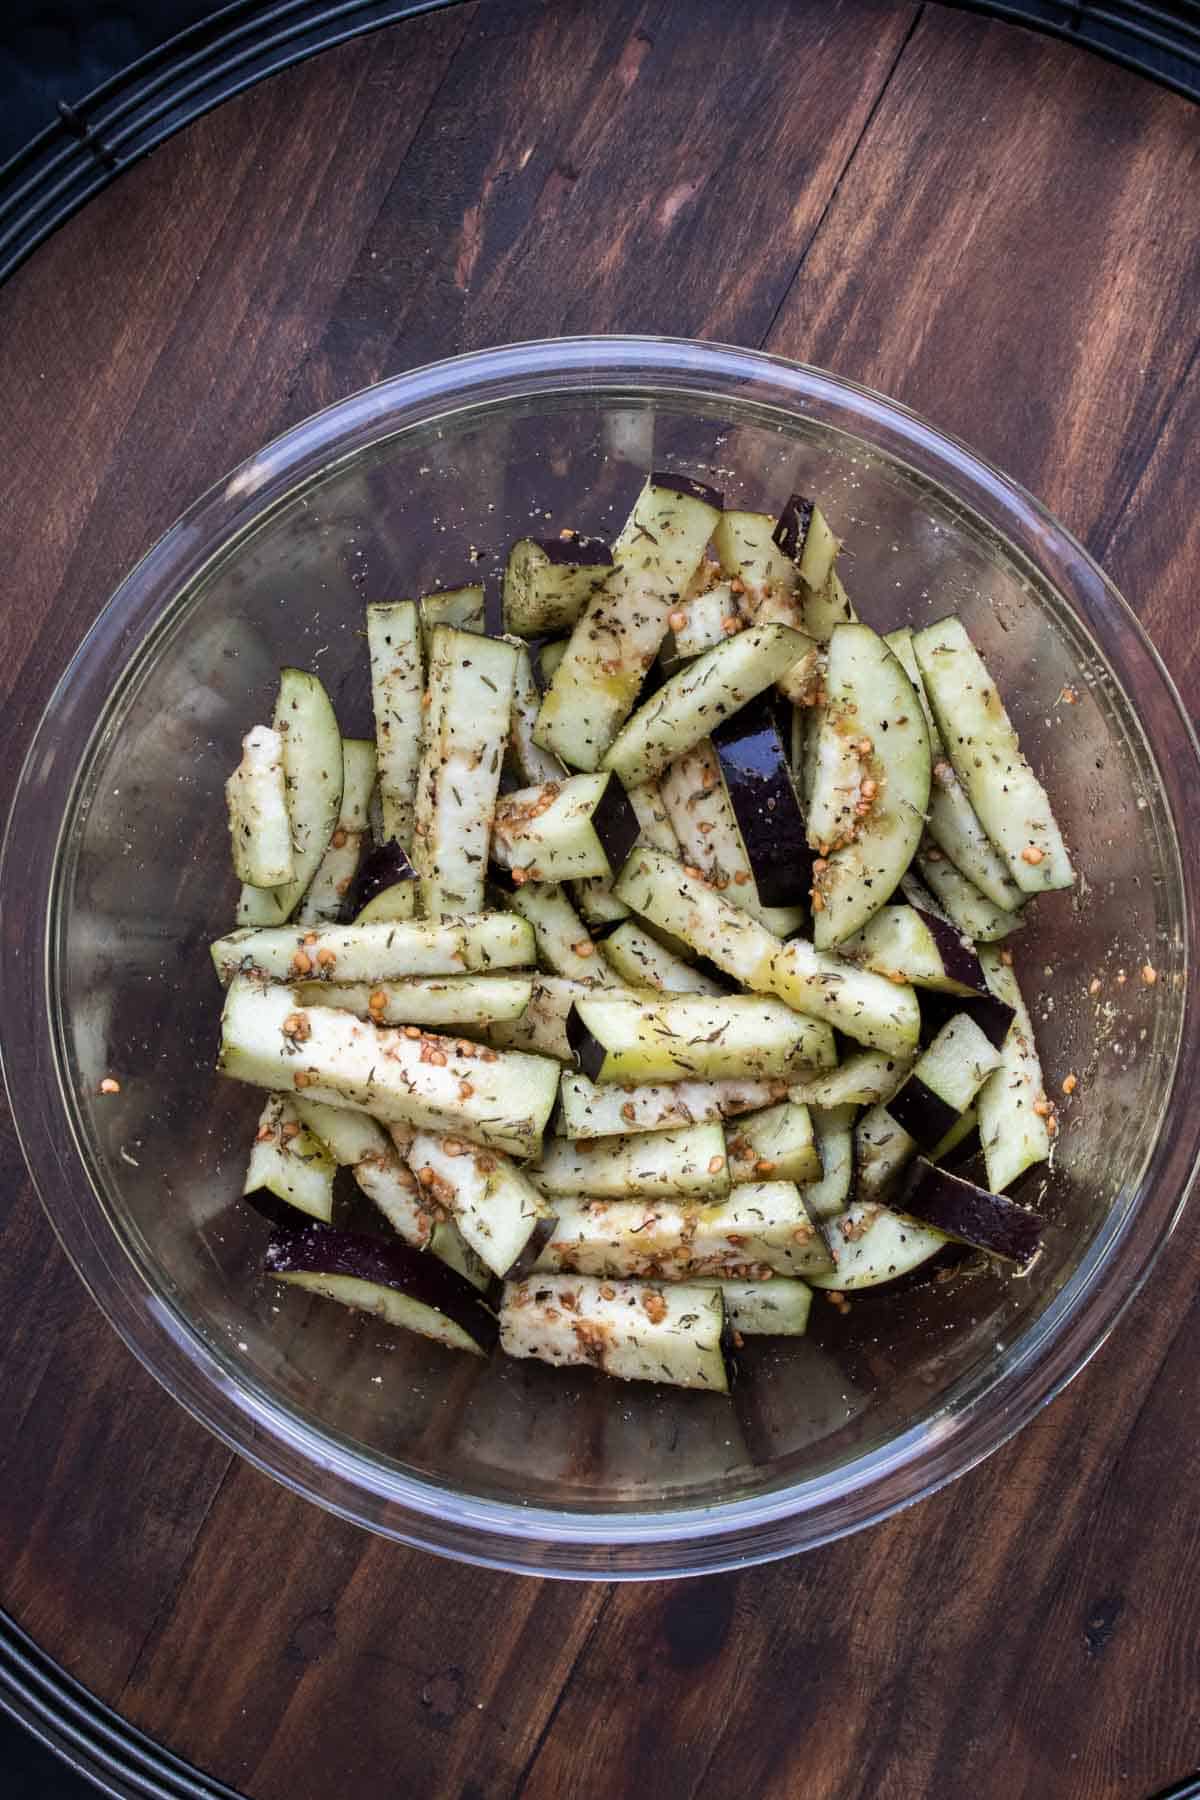 Glass bowl with fry shaped eggplant pieces covered in spices.